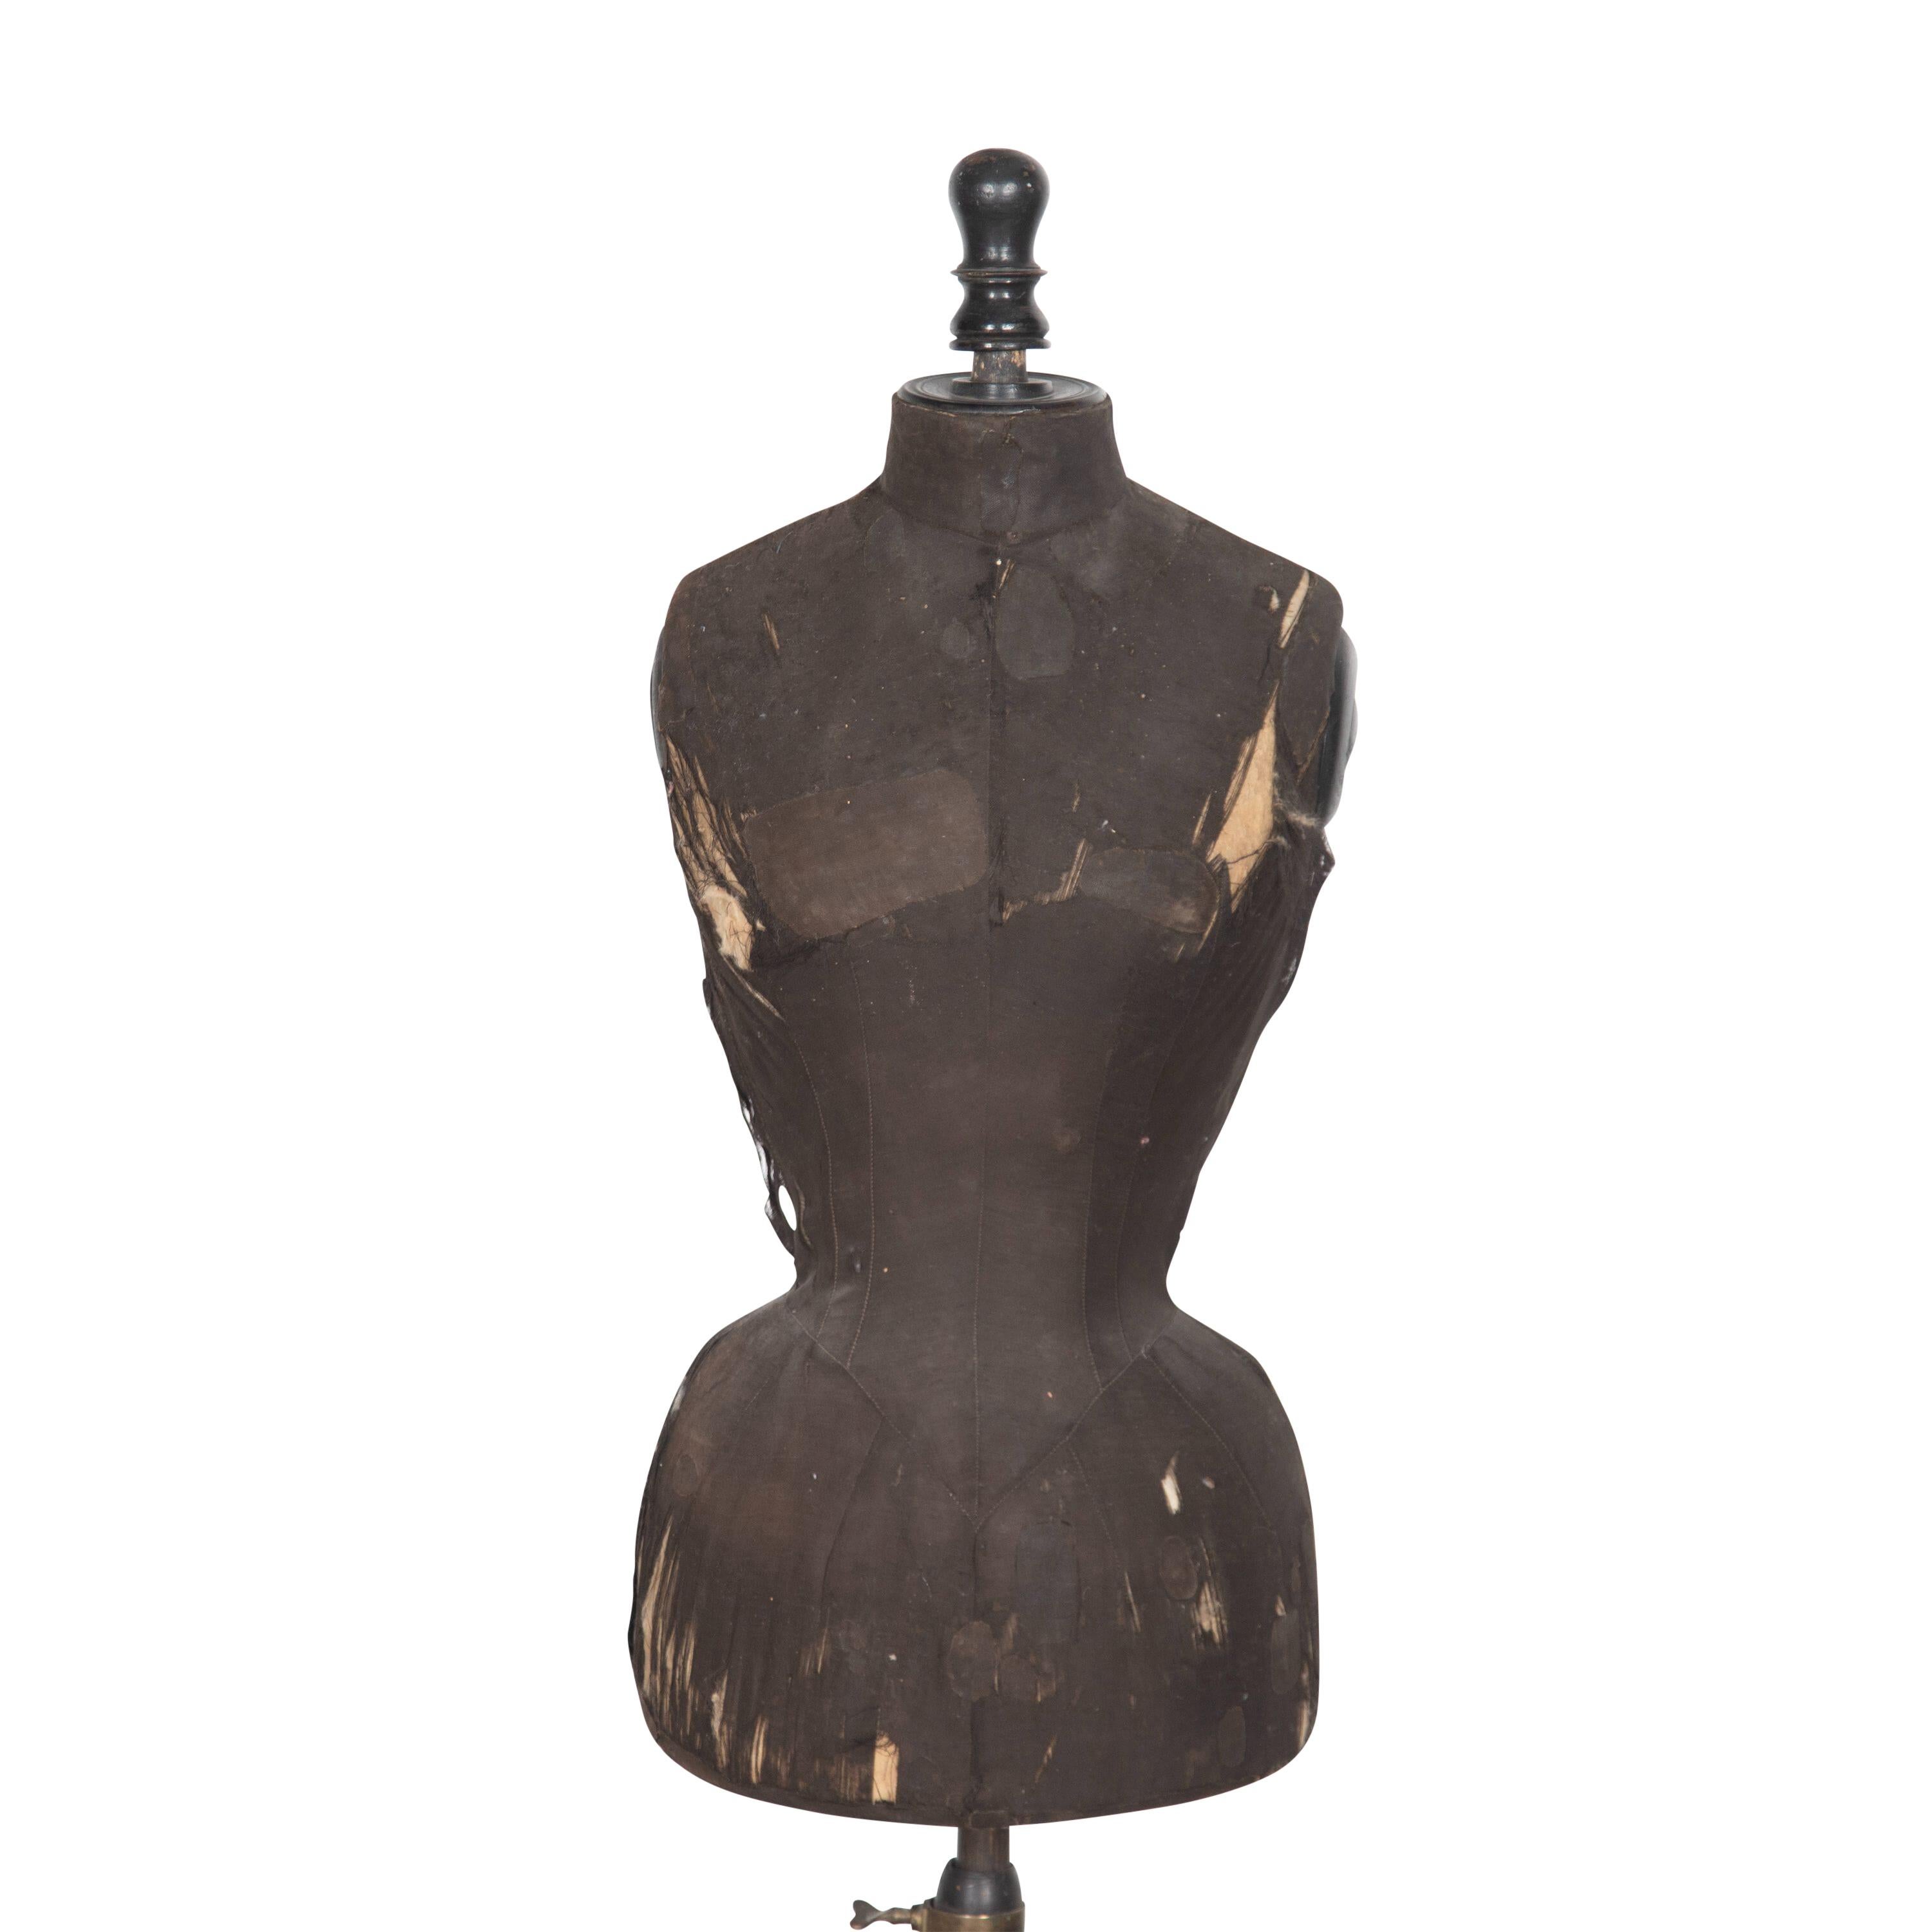 19th Century French wasp waist mannequin with original fabric.
With patched and worn character, signs of wear, commensurate with age.